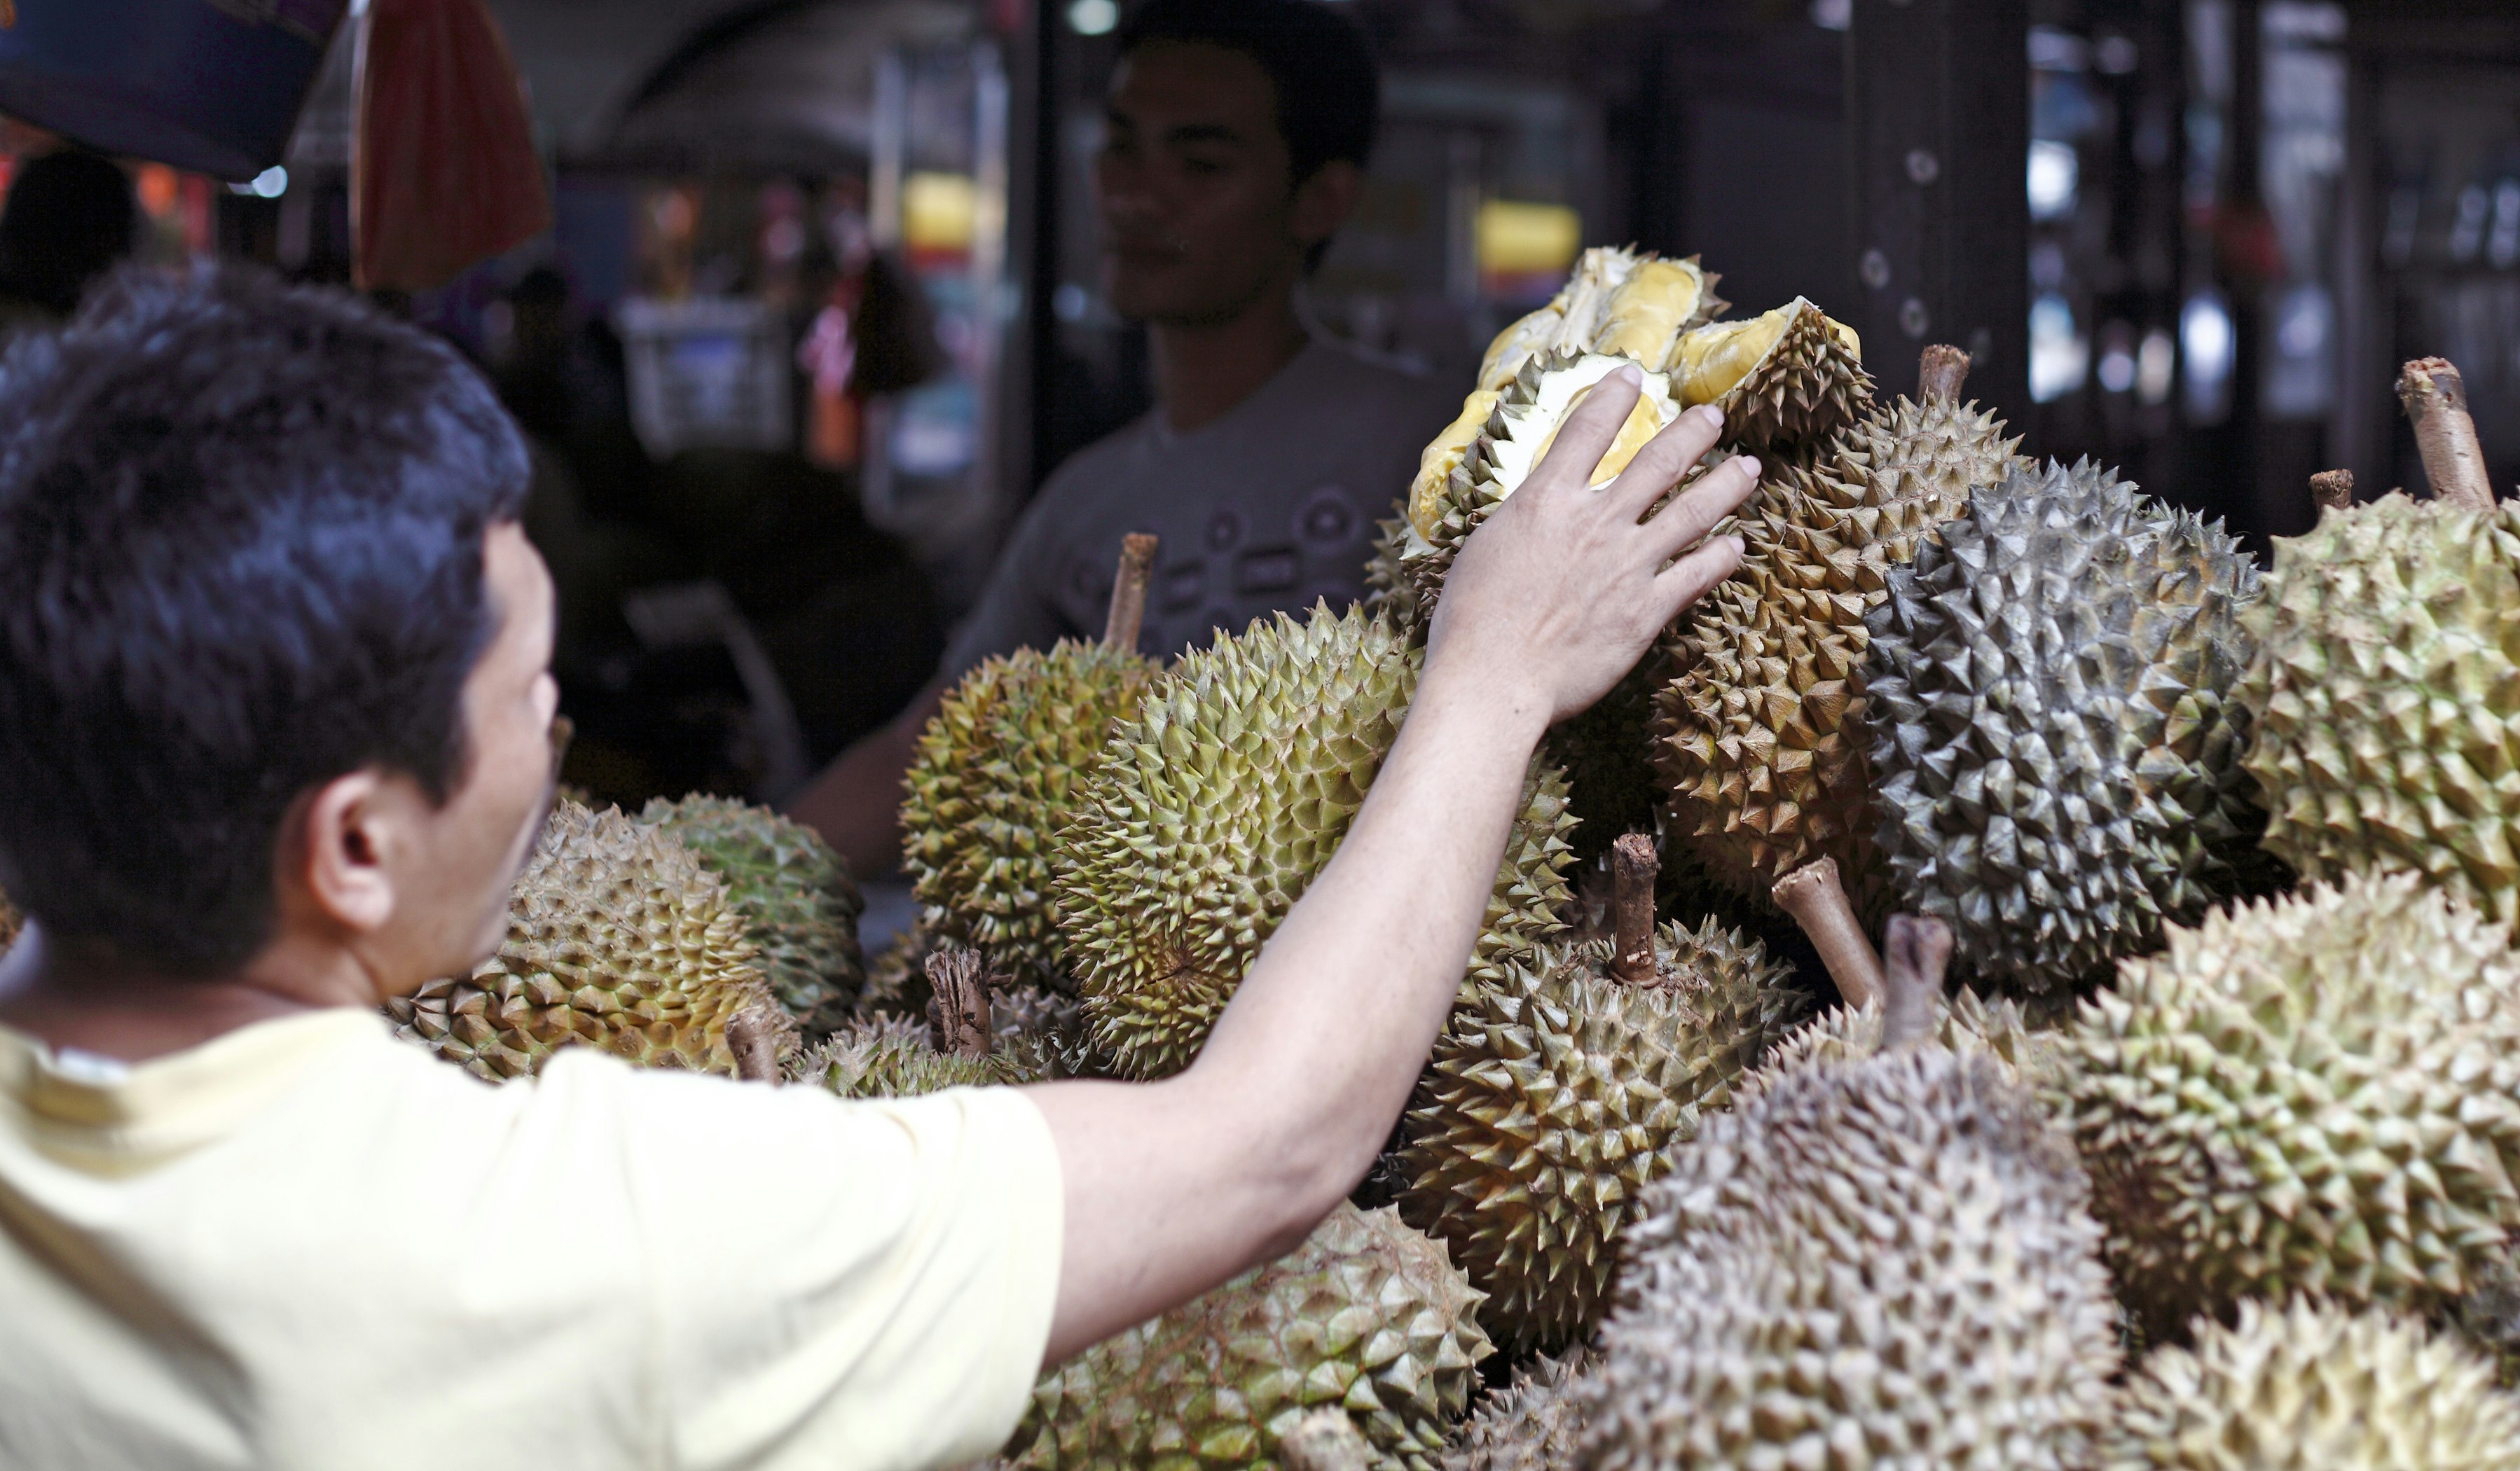 KUALA LUMPUR, MALAYSIA - SEPT 11: A shopper at a durian fruit stall on September 11, 2011 in Bazaar Baru Chow Kit, Kuala Lumpur, Malaysia. Durian is revered in Southeast Asia as the King of Fruits.; Shutterstock ID 84916264; Your name (First / Last): Lauren Gillmore; GL account no.: 56530; Netsuite department name: Online-Design; Full Product or Project name including edition: 65050/ Online Design /LaurenGillmore/POI